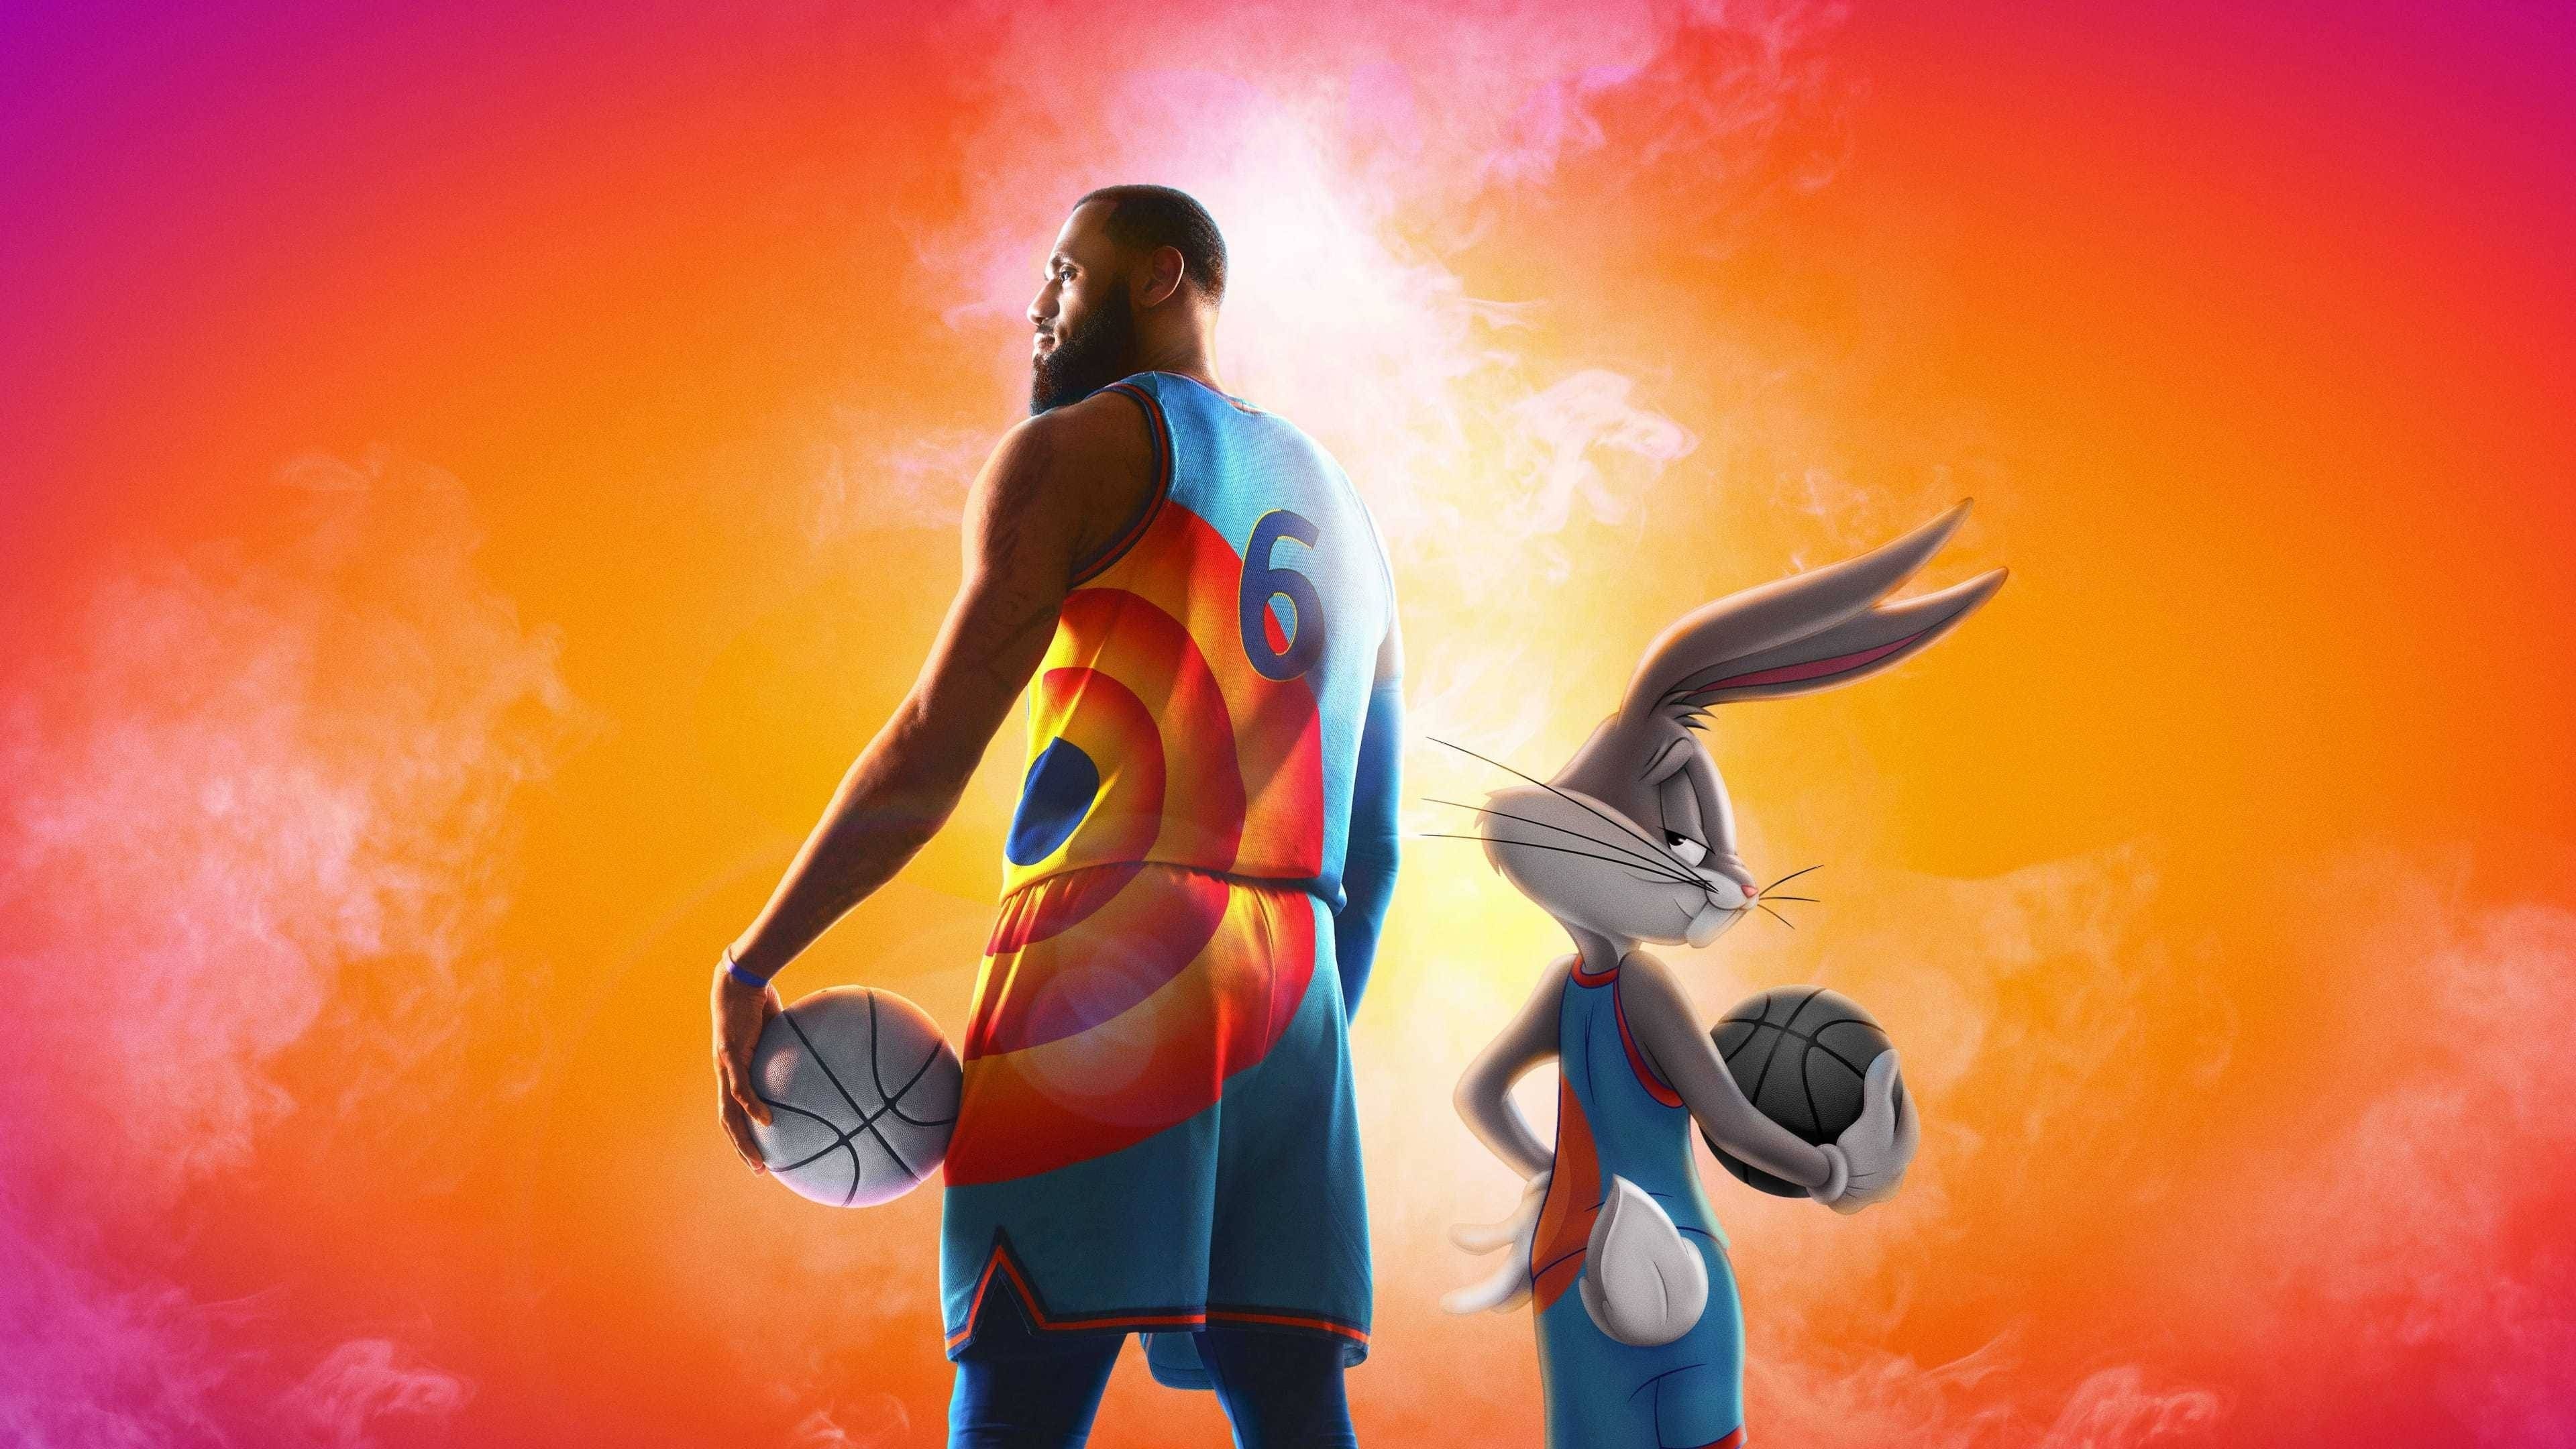 Space Jam: A New Legacy (2021), LeBron James and Bugs Bunny. 3840x2160 4K Wallpaper.